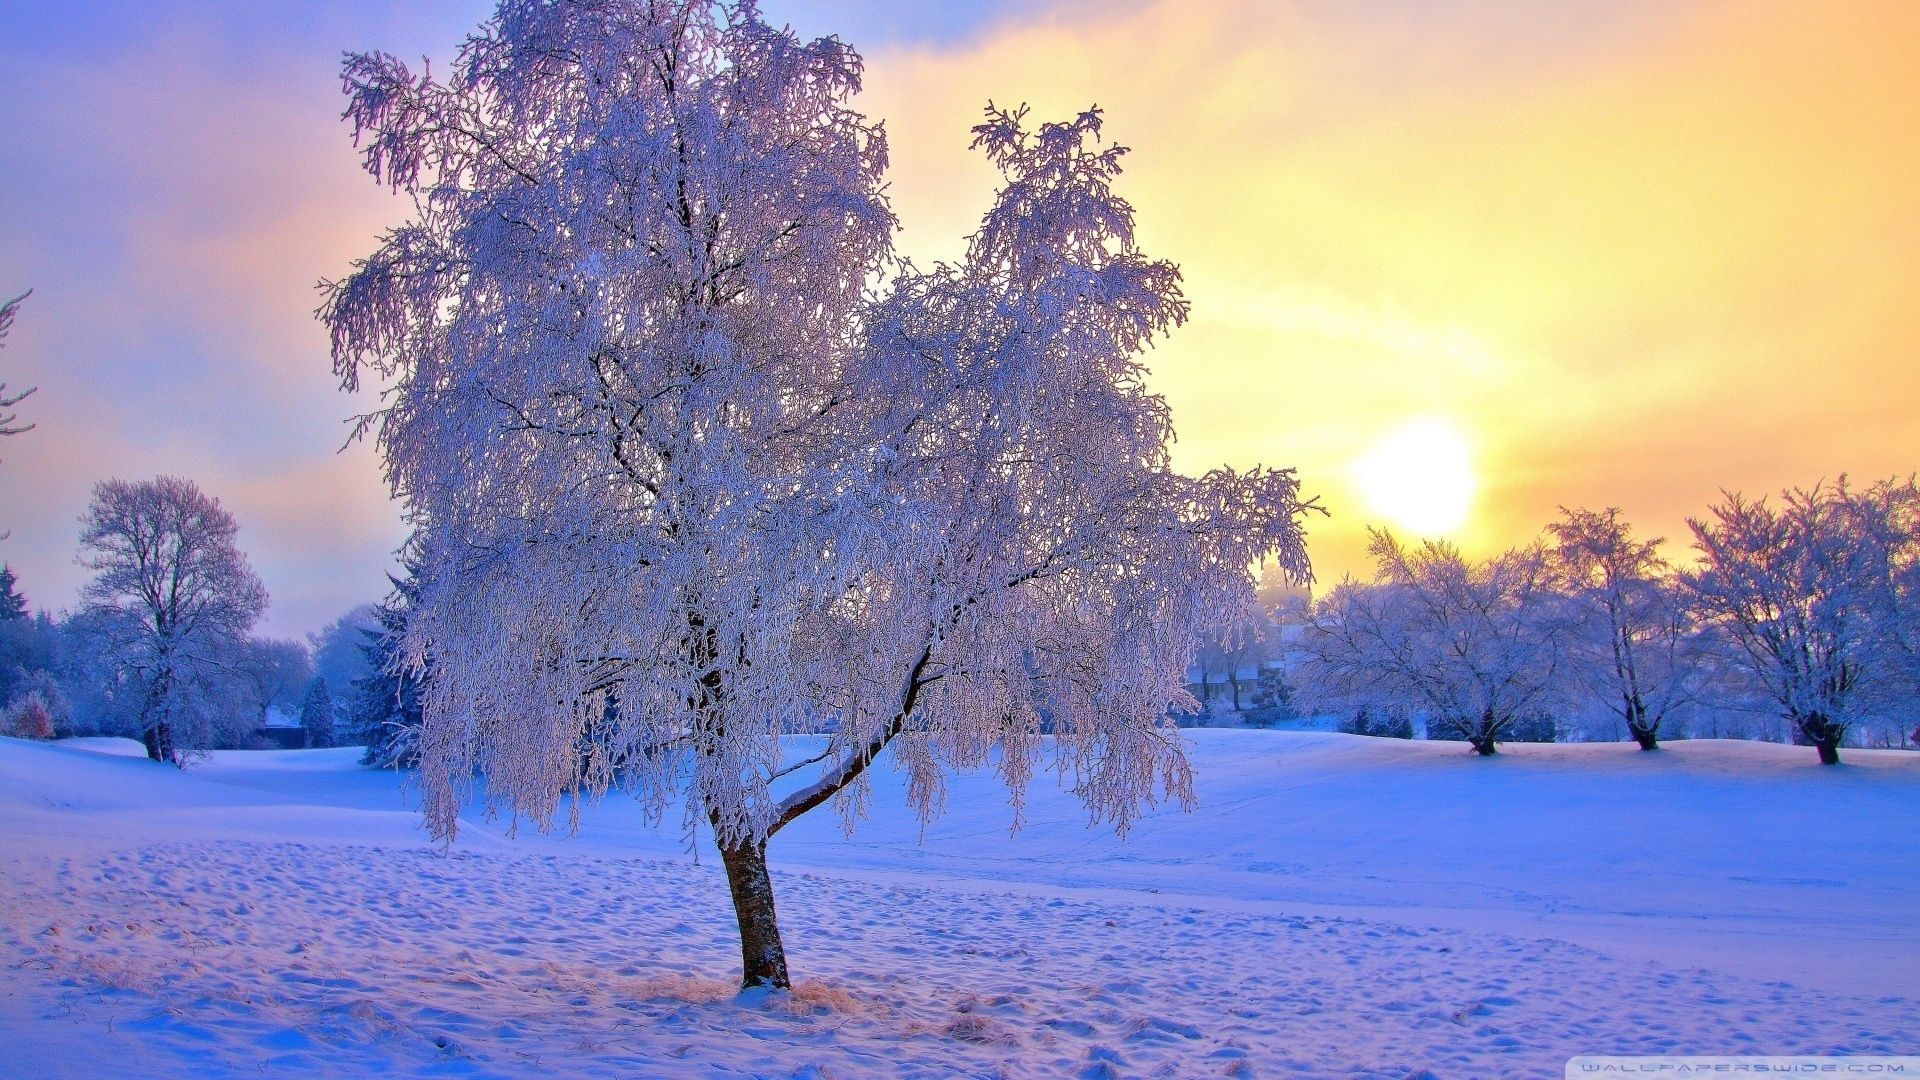 Because winter somehow marks the start of the holiday season, beautiful winter wallpaper and amazing winter sc. Winter wallpaper, Winter sunset, Winter landscape